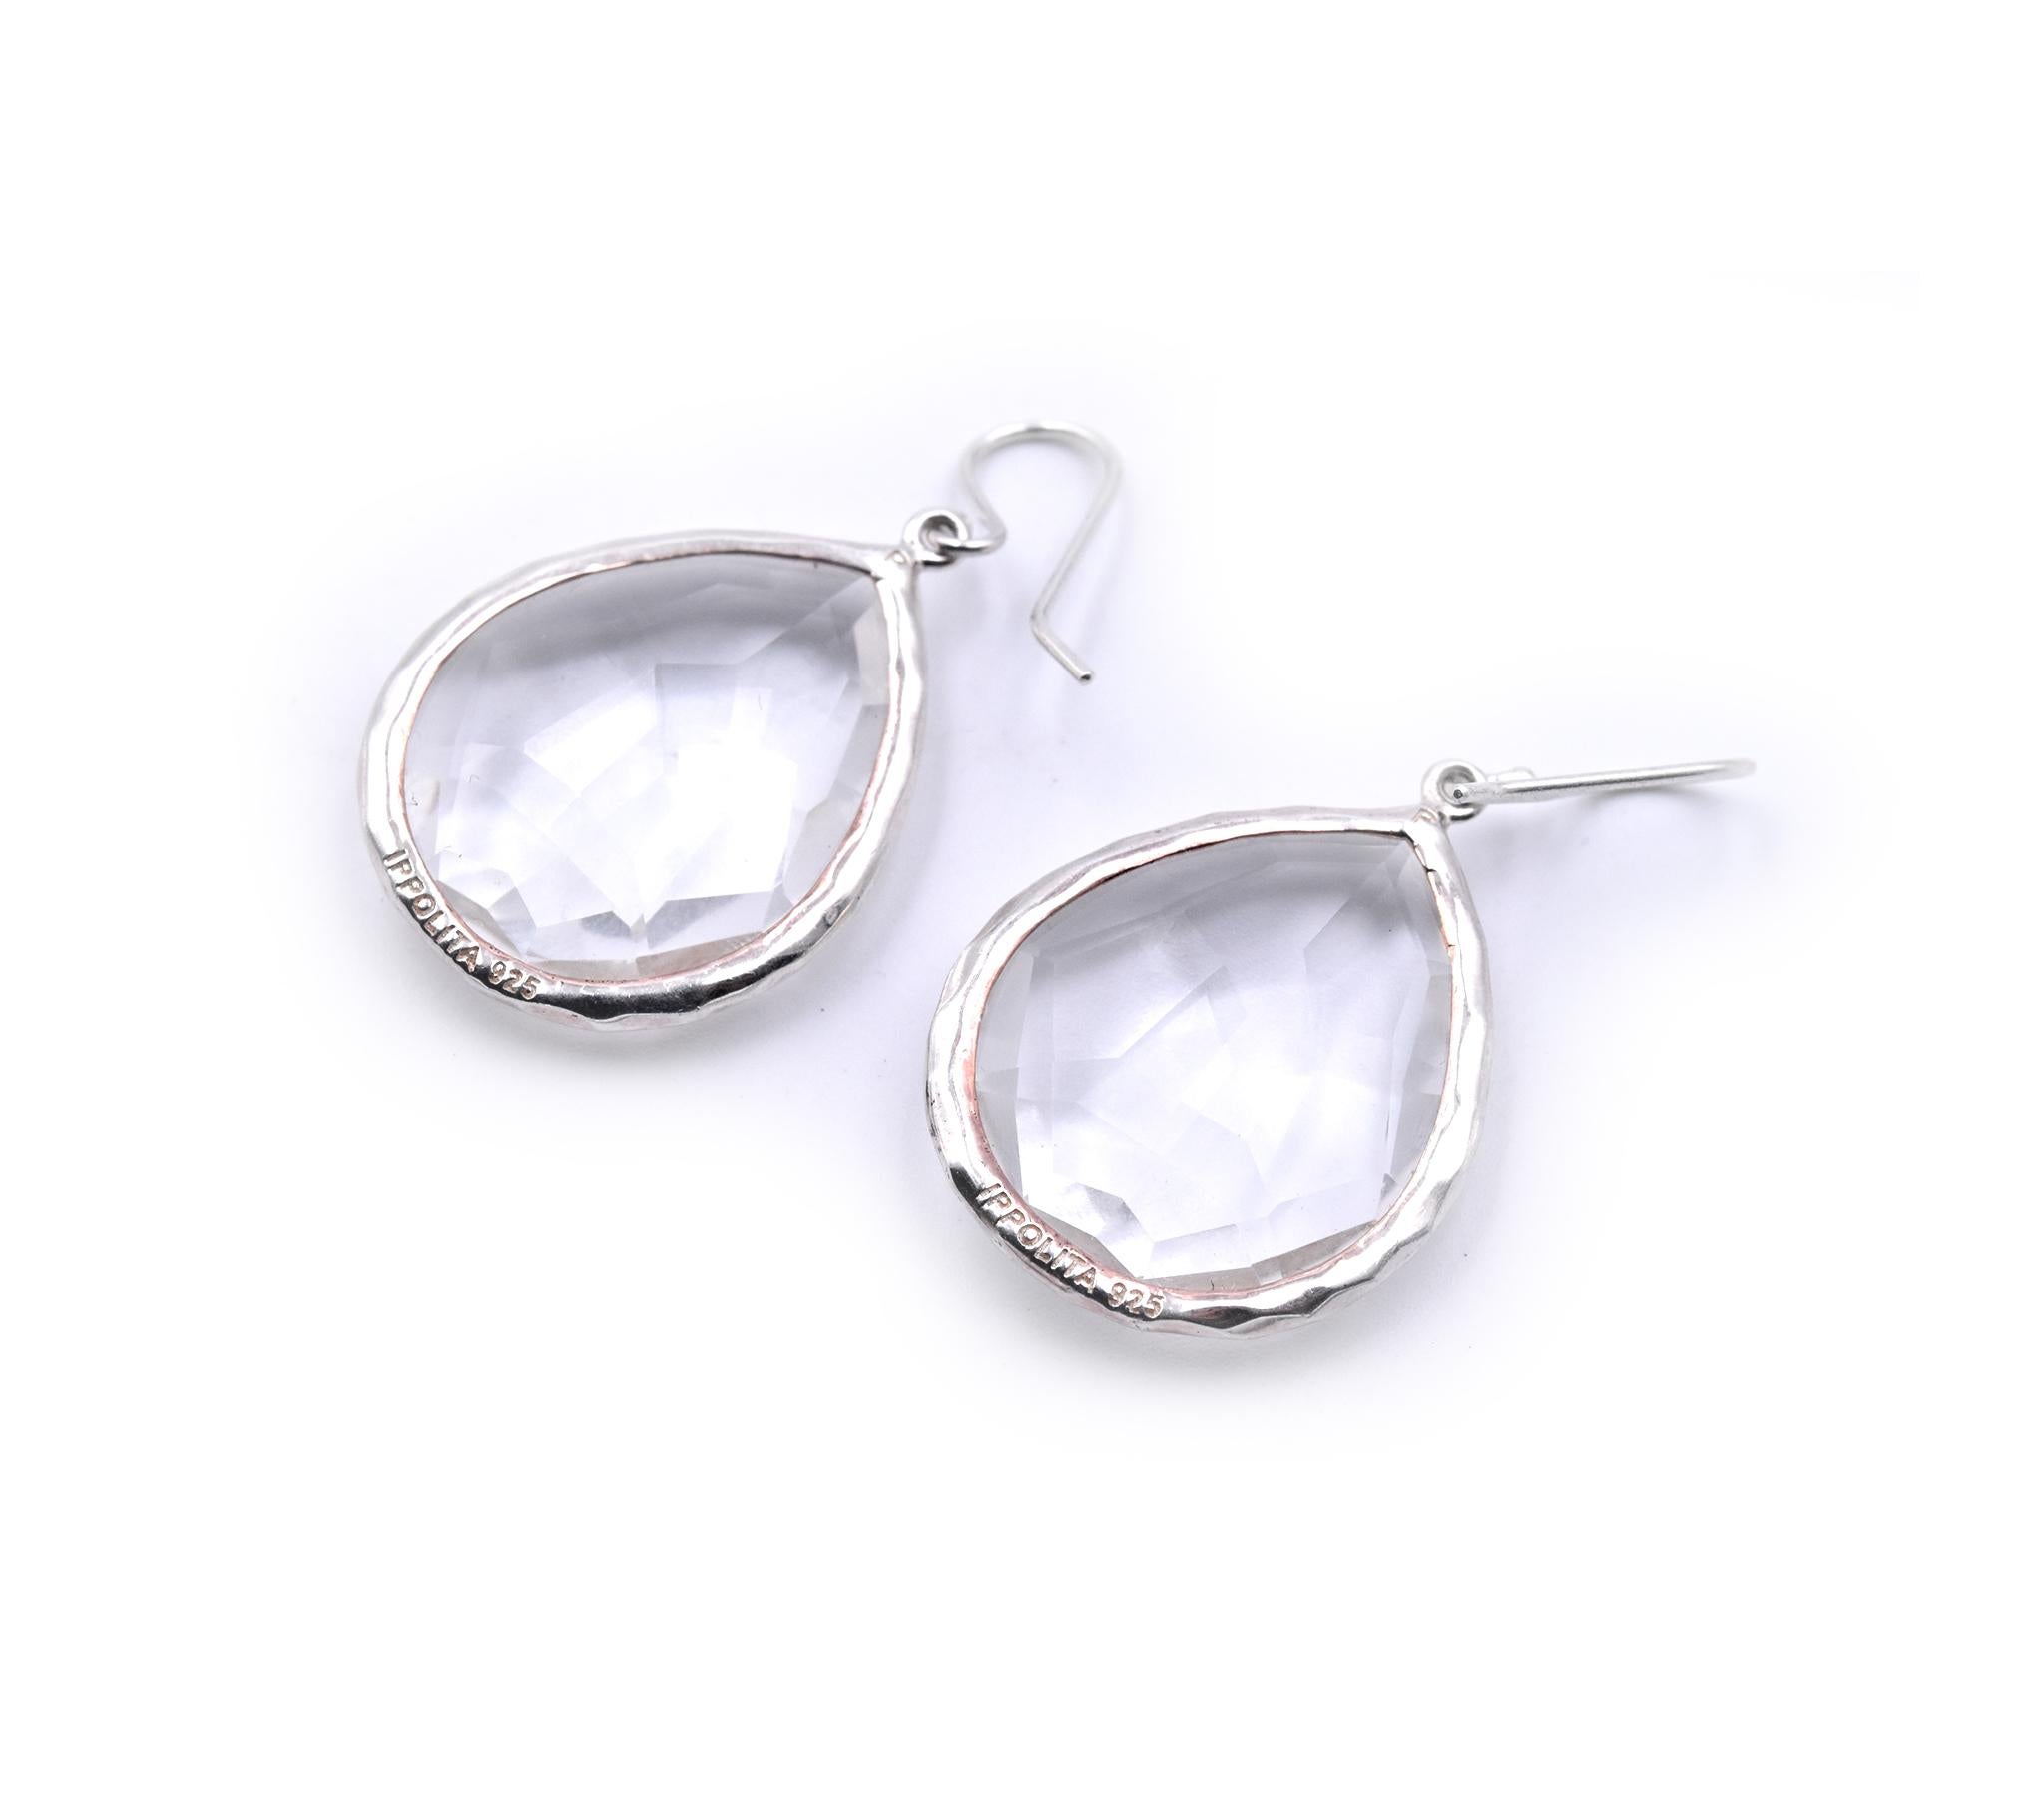 Designer: Ippolita
Material: Sterling Silver 
Gemstone: rock candy
Dimensions: earrings measures 30mm x 20mm
Weight: 10.7 grams